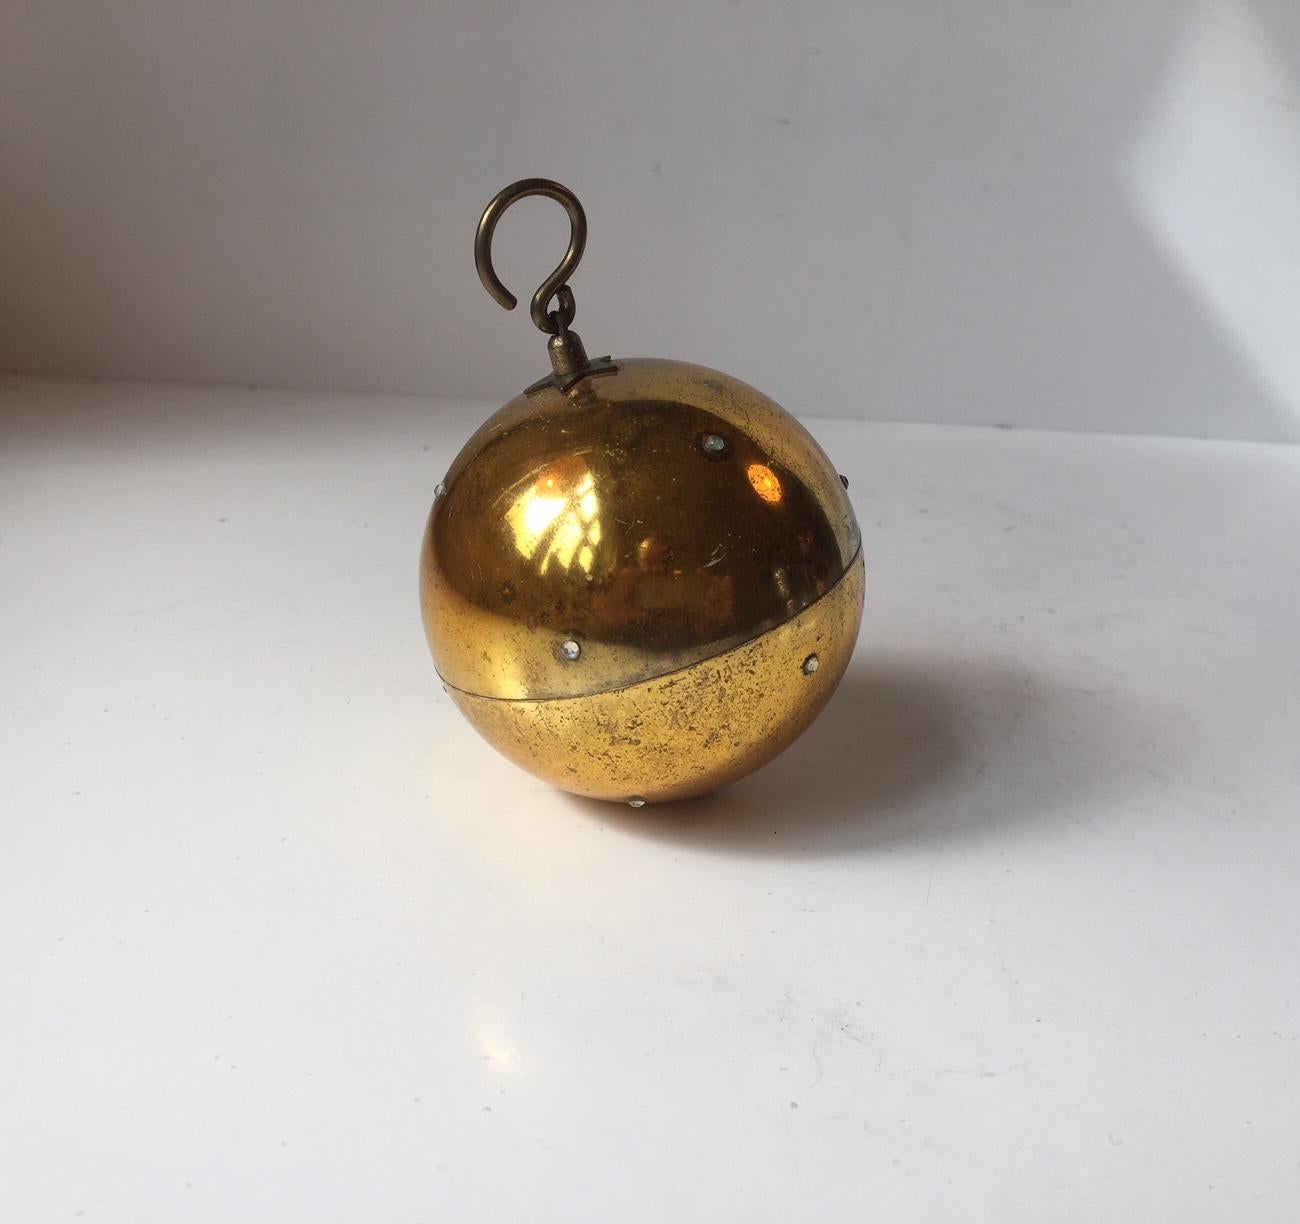 A string pull-up mechanical Christmas sphere playing Silent Night. Manufactured by Reuge in St. Croix Switzerland during the 1960s. This is the rare bejeweled version mimicking Christmas night. This object is in working order and is meant to be hung